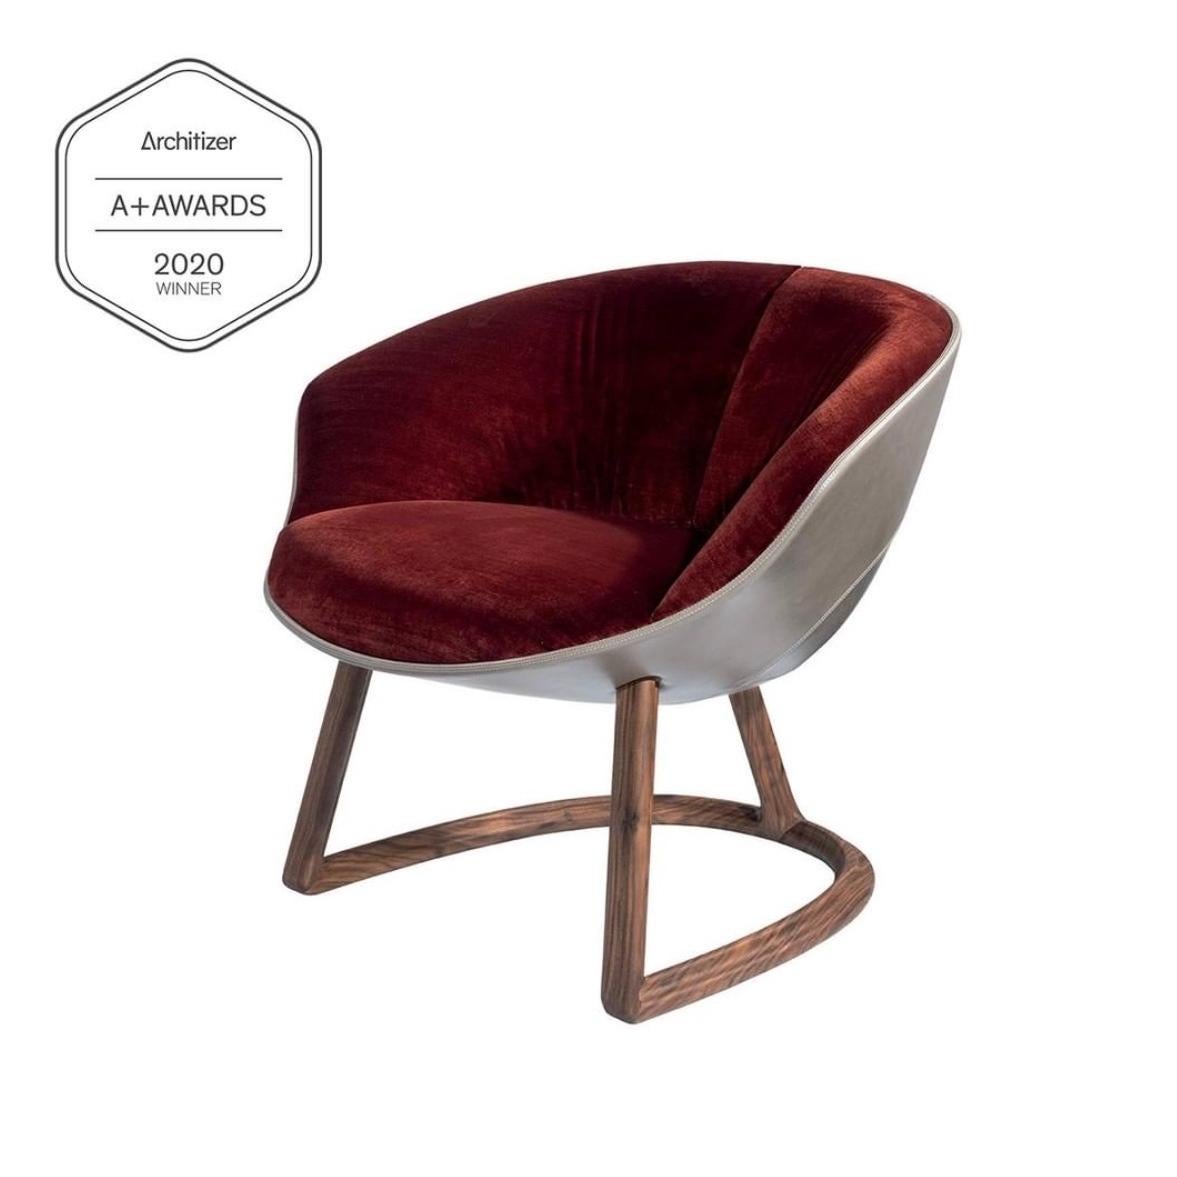 Italian Visionnaire Camden Armchair with Wood Frame and Upholstery by Mauro Lipparini For Sale